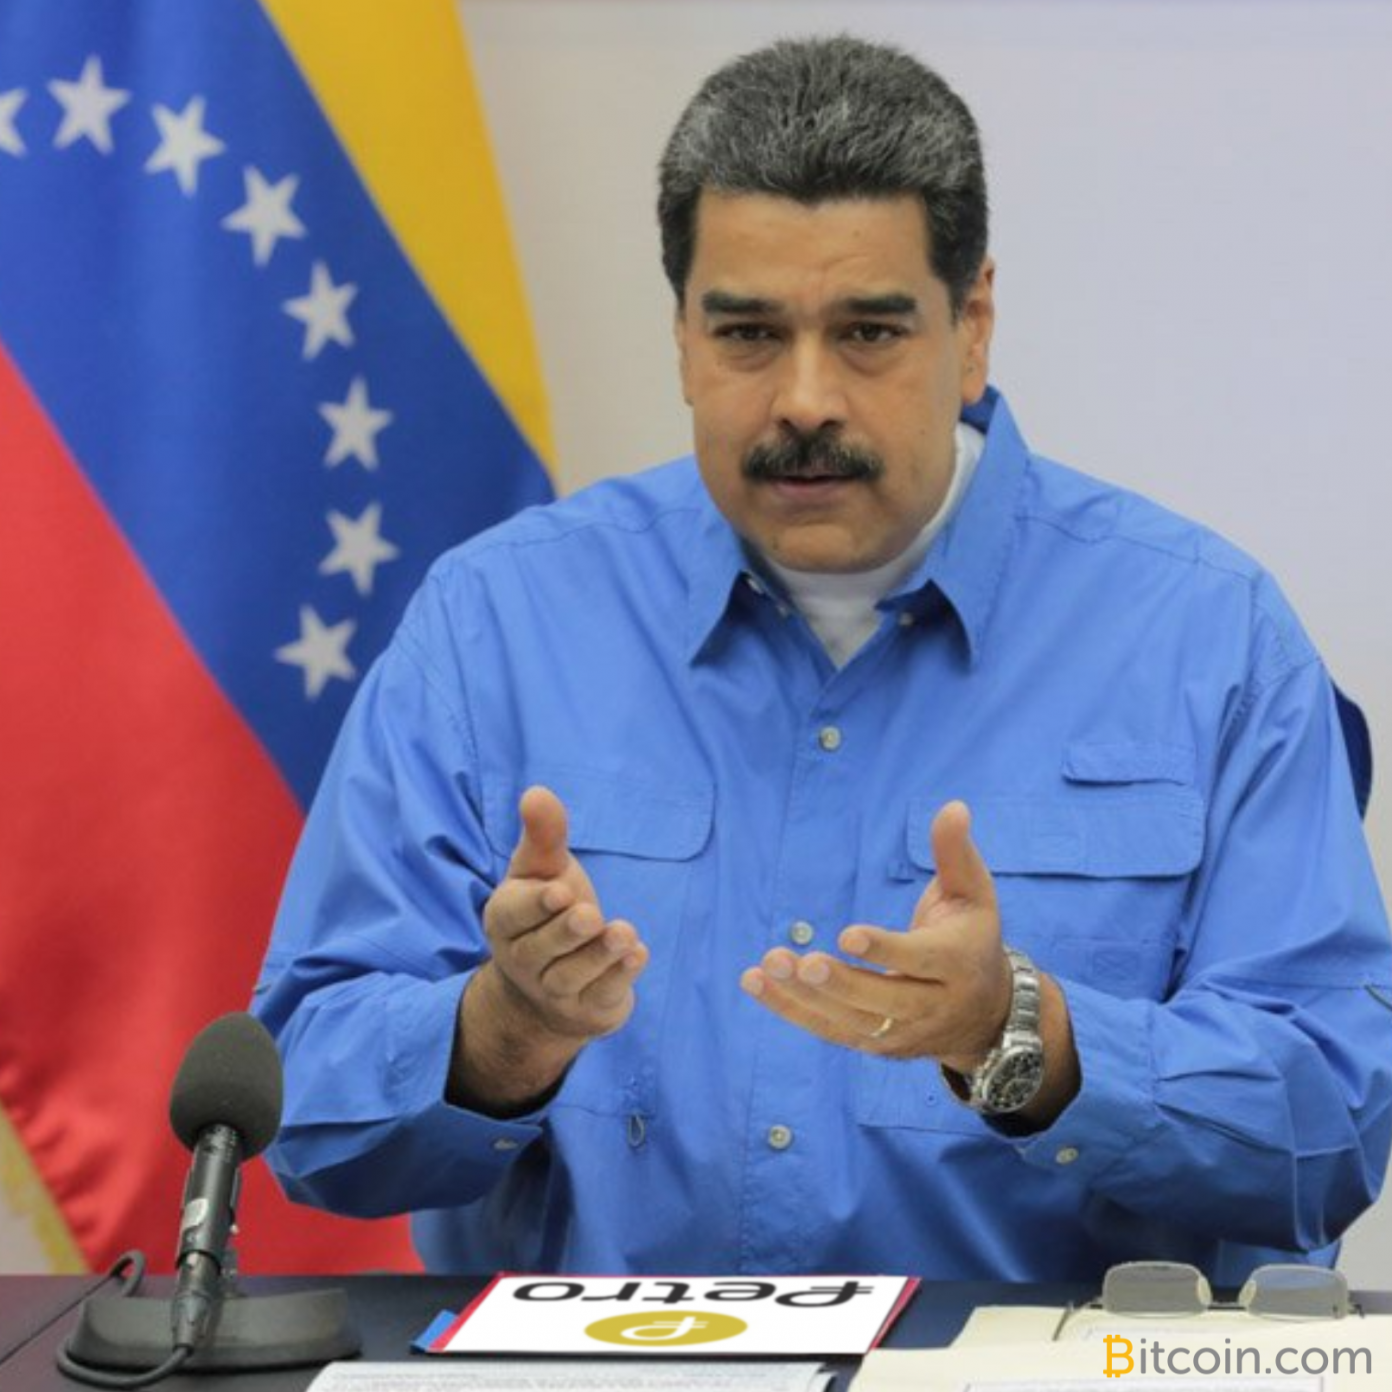 Venezuela Announces Whitepaper and Pre-Sale of Its Oil-Backed Cryptocurrency Petro